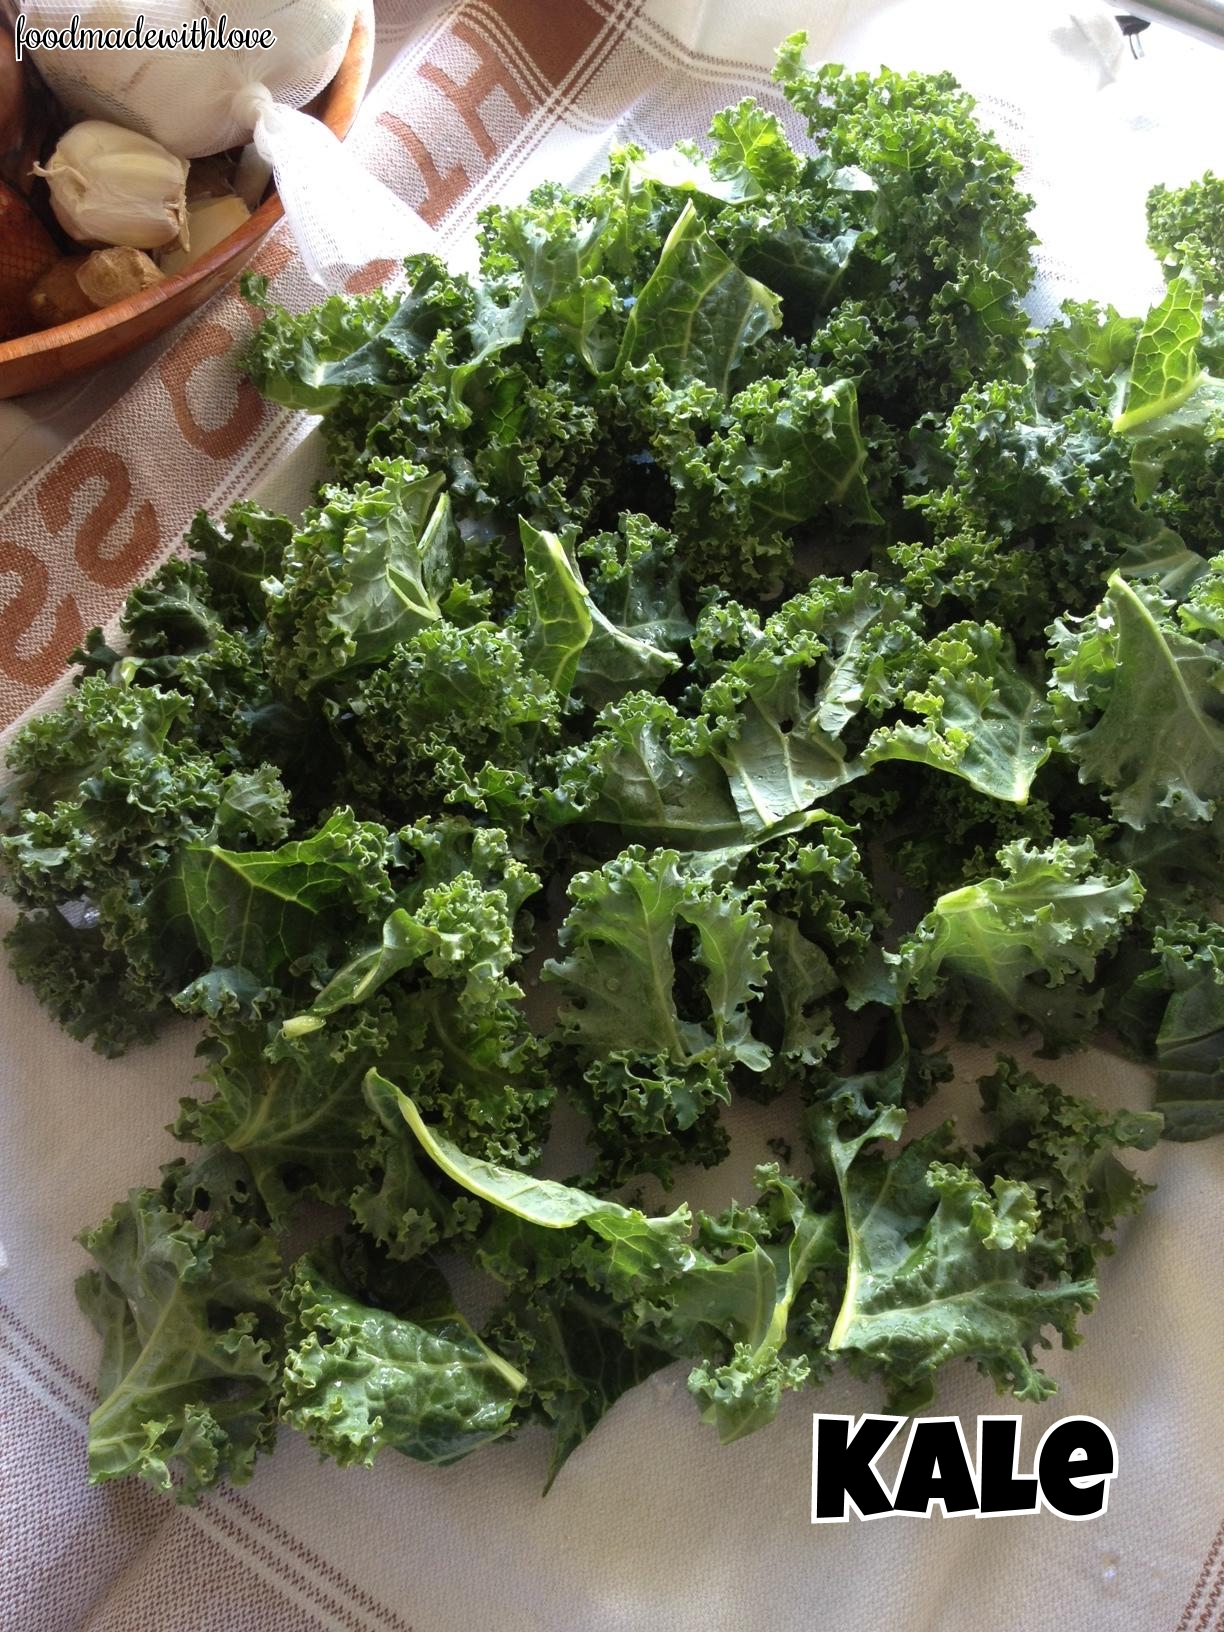 Kale Chips Two Ways Food Made With Love